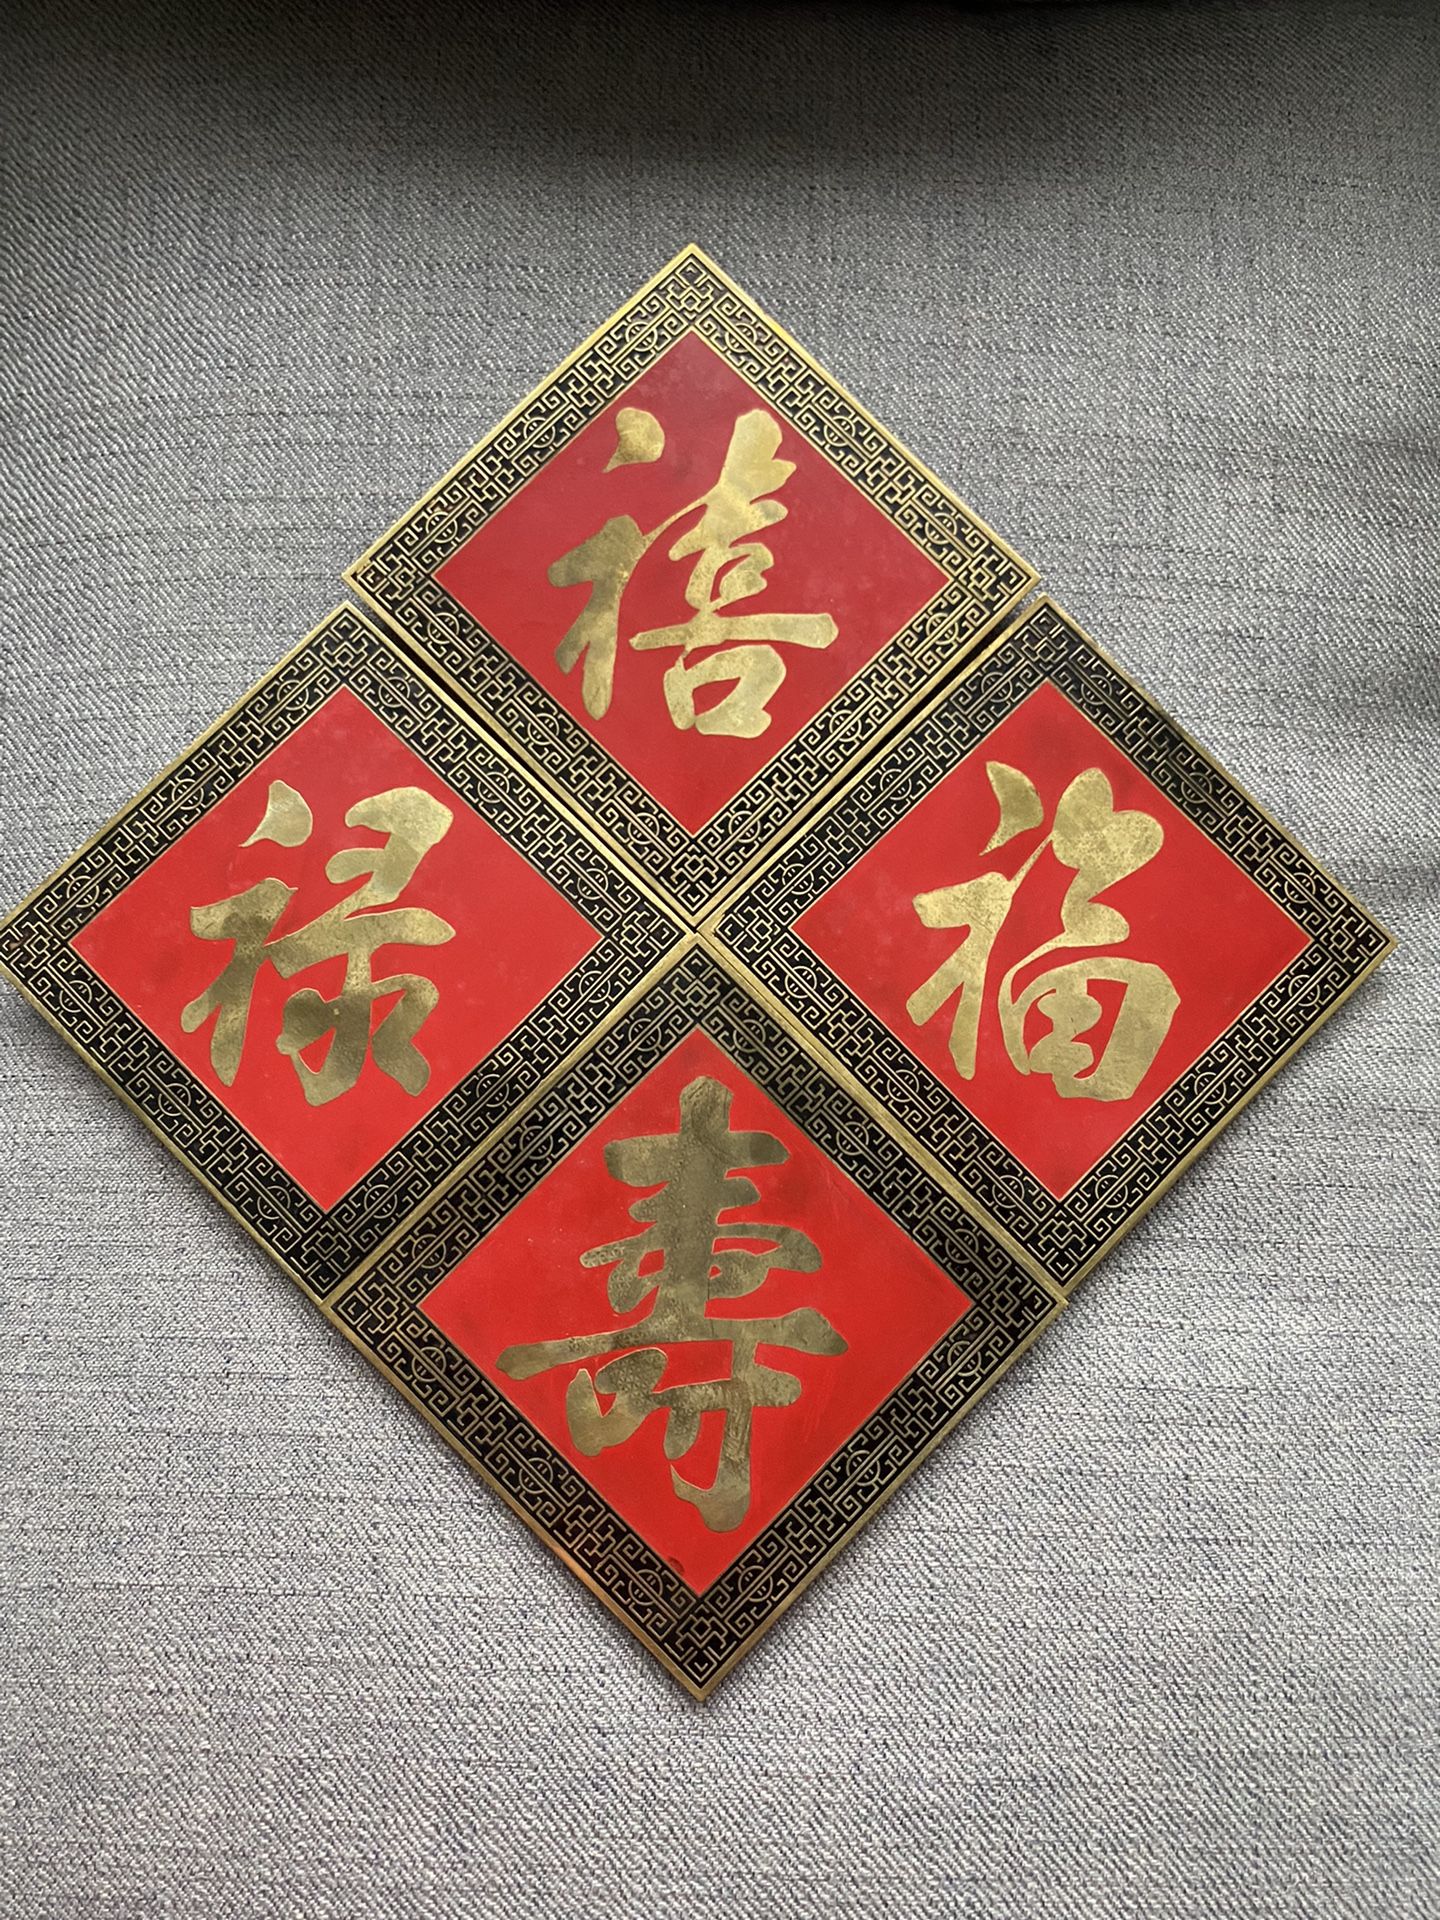 Vintage Brass And Enamel Chinese Character /Symbol  Trivet/Wall Hanging Tiles